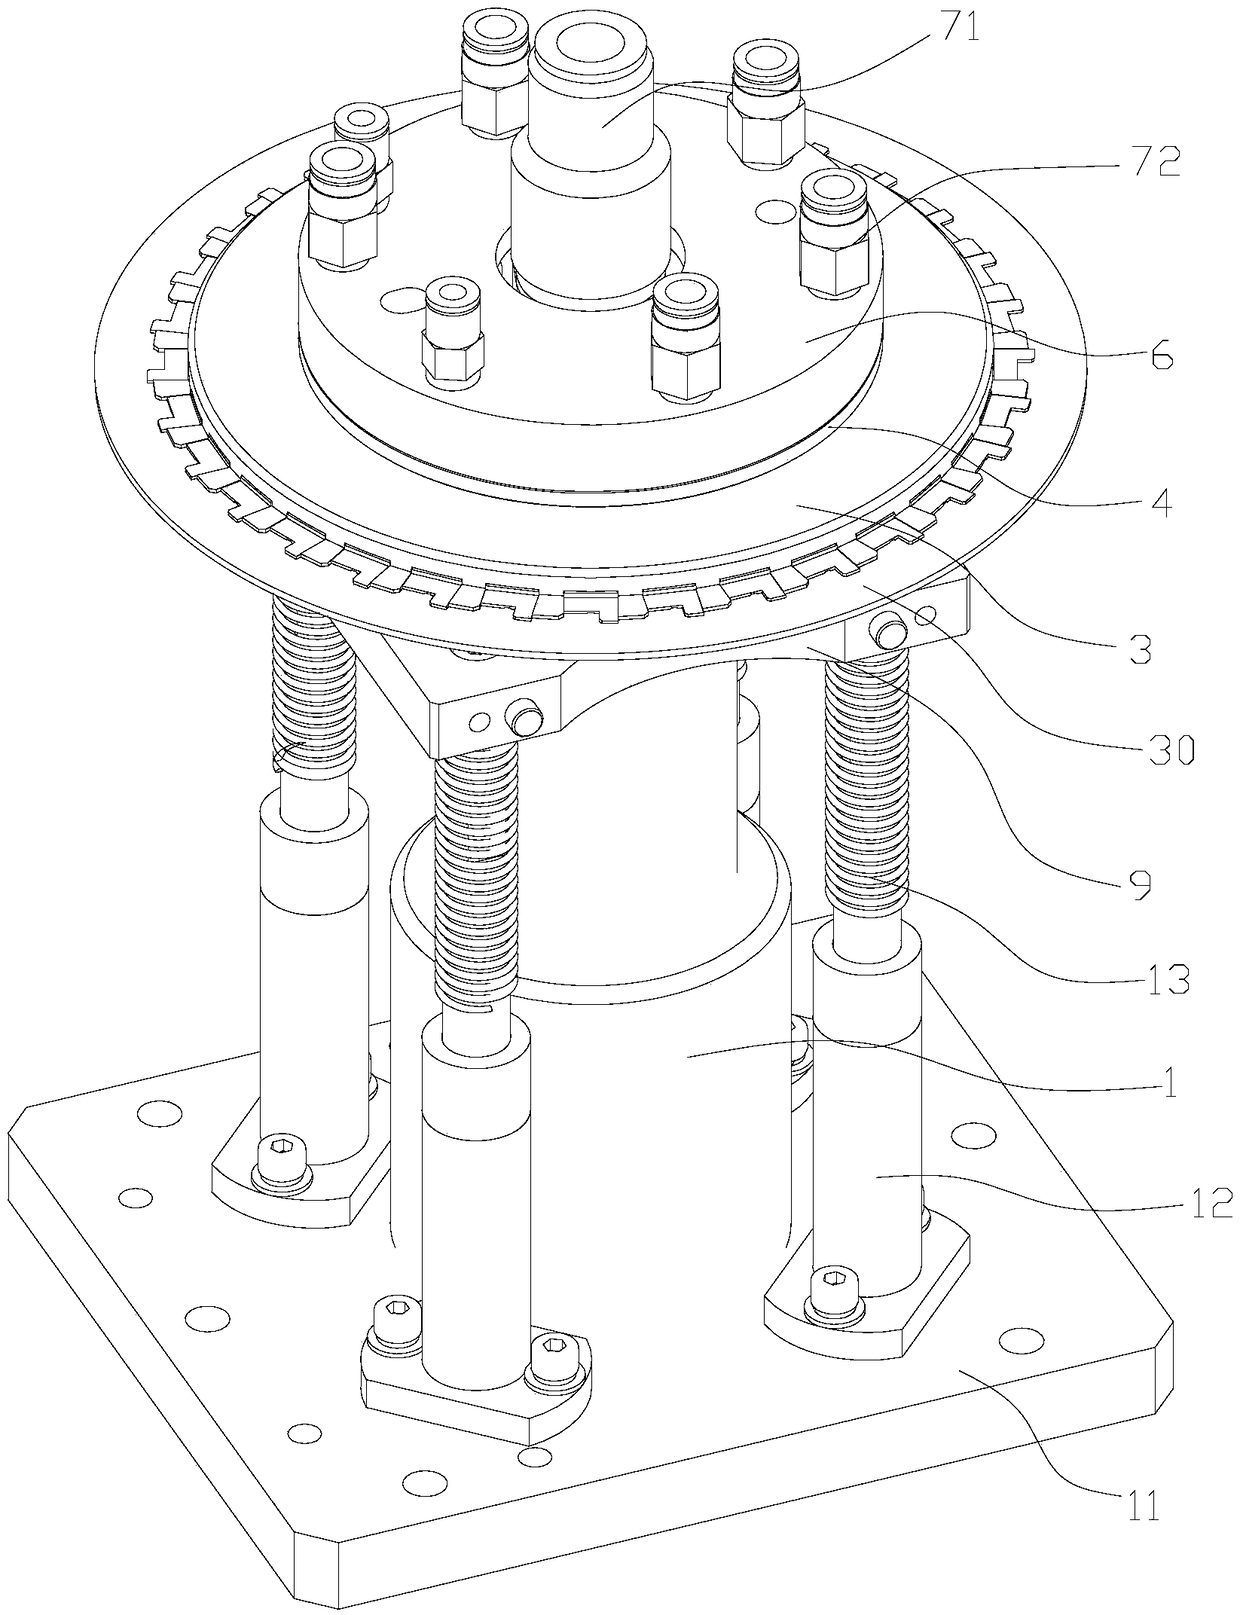 Double-channel rotary table assembly